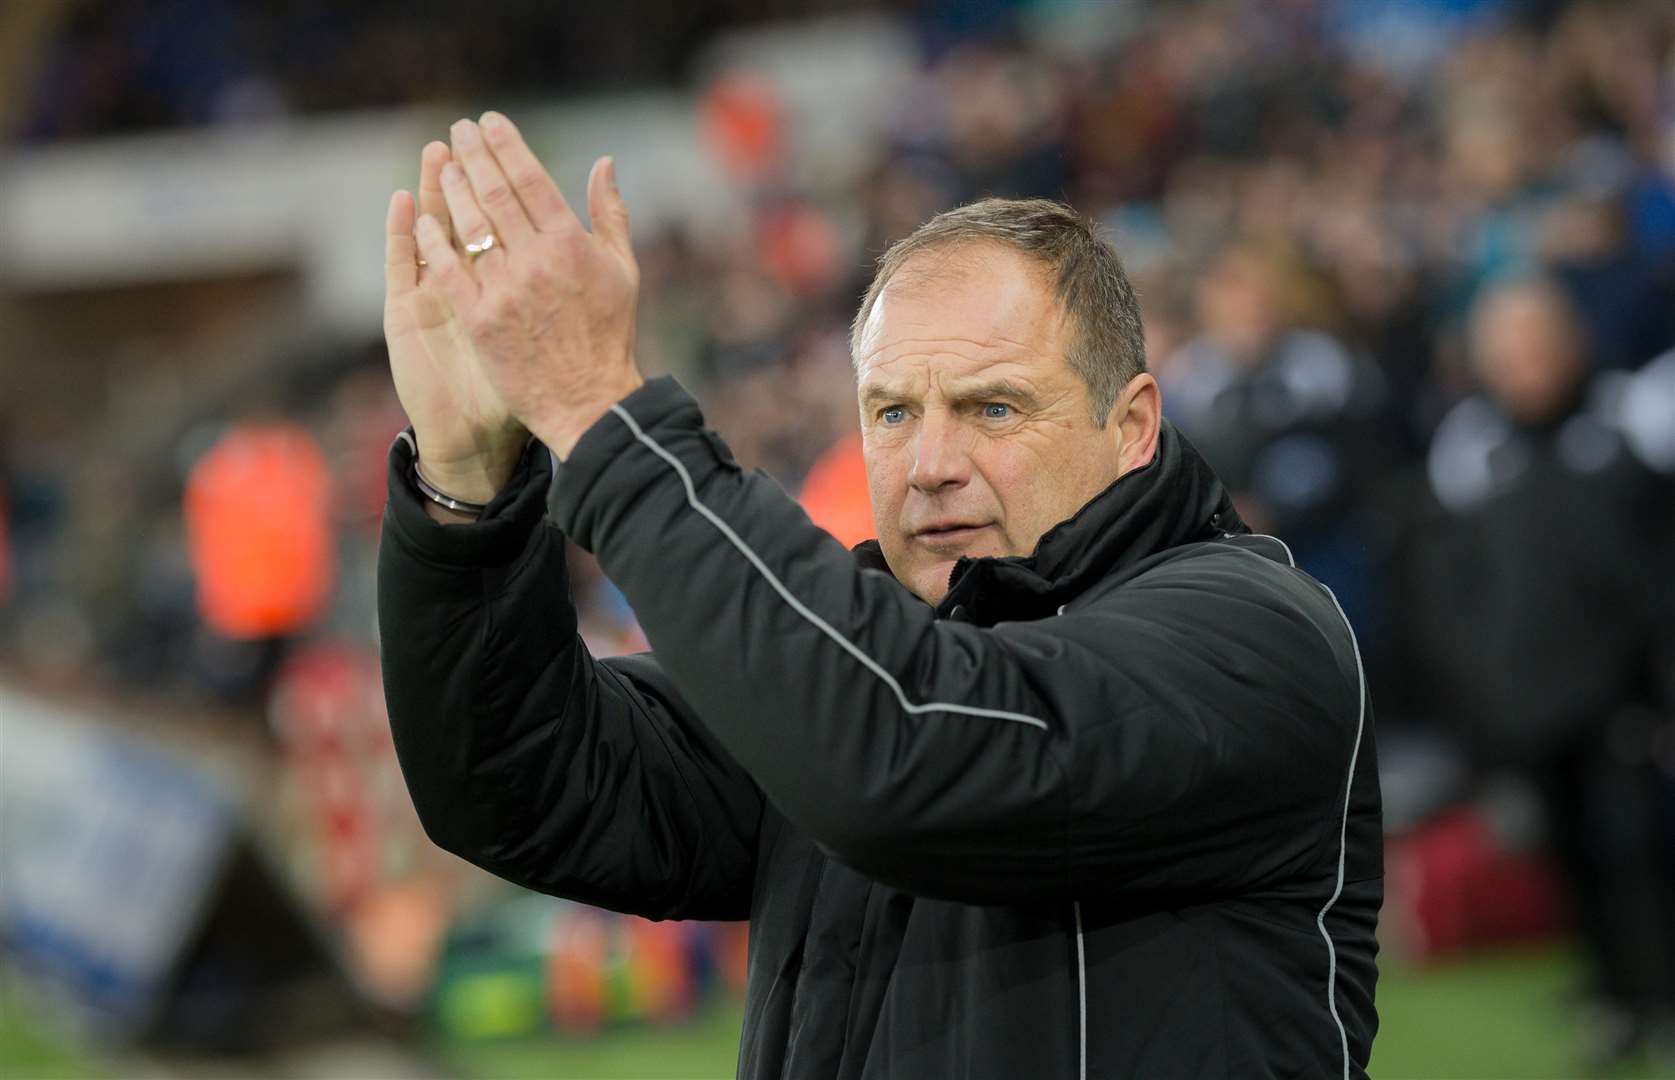 Steve Lovell enjoyed his time as Gillingham manager but left two games before the end of the season